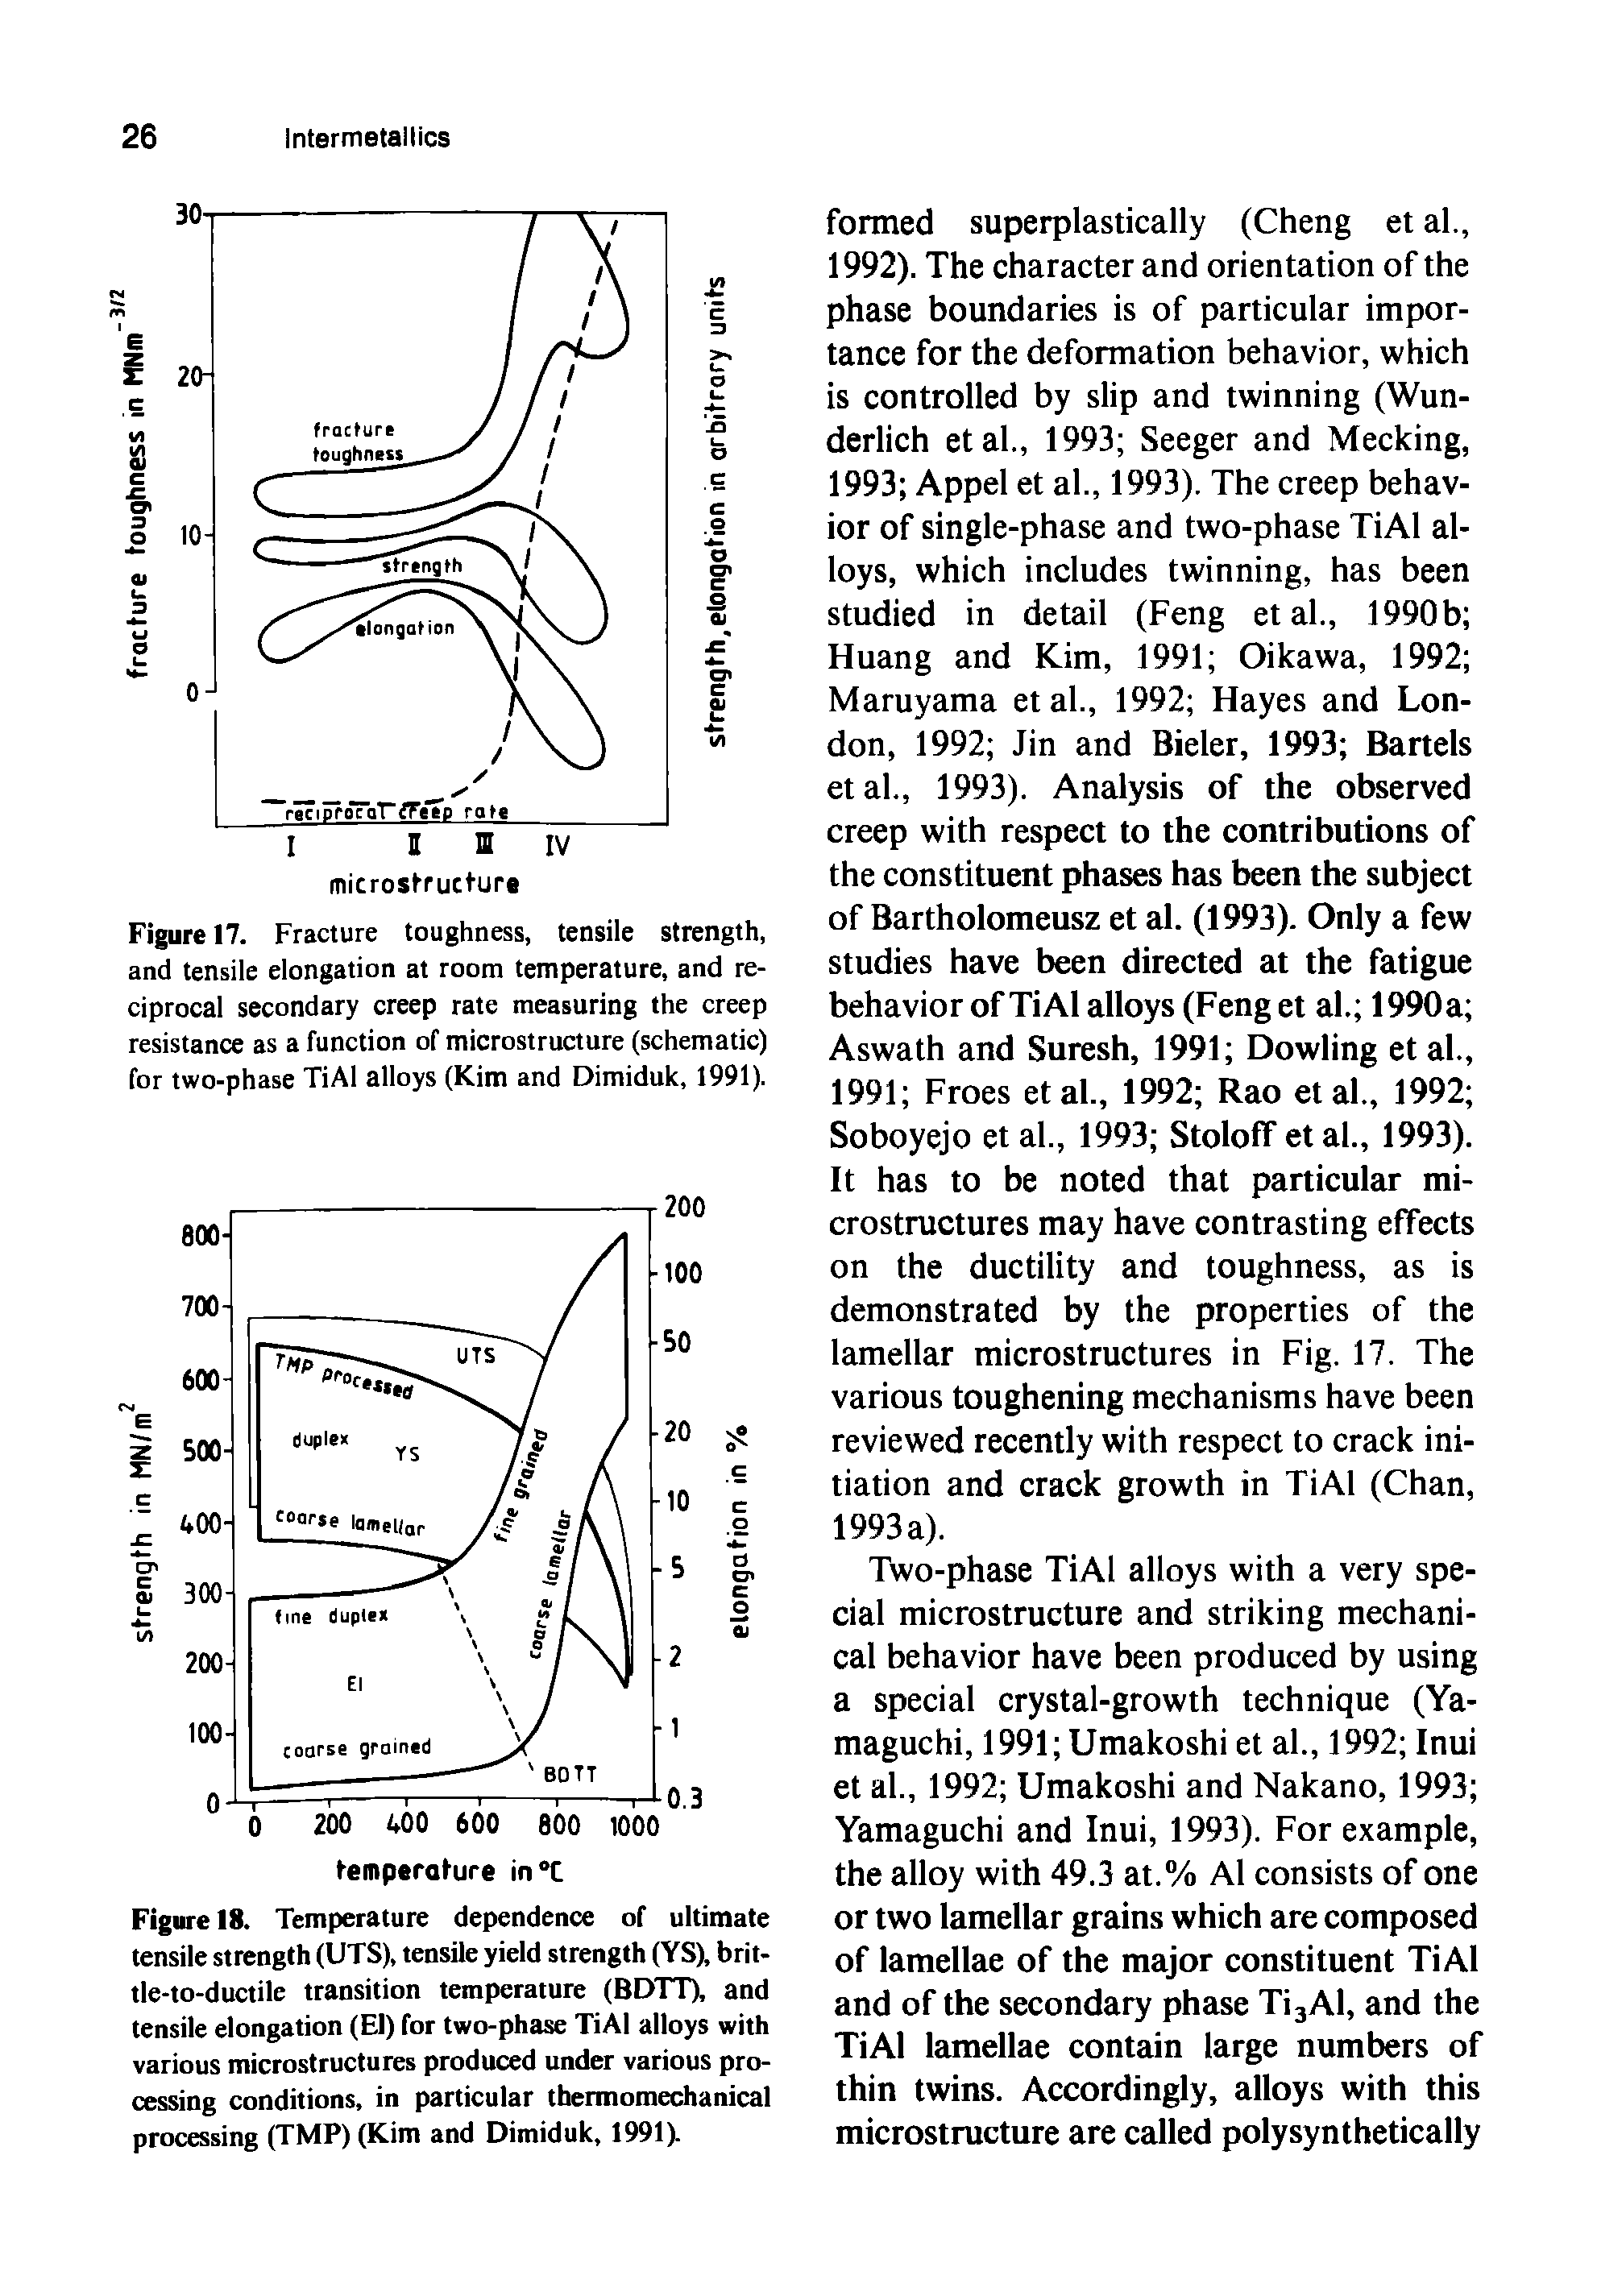 Figure 17. Fracture toughness, tensile strength, and tensile elongation at room temperature, and reciprocal secondary creep rate measuring the creep resistance as a function of microstructure (schematic) for two-phase TiAl alloys (Kim and Dimiduk, 1991).